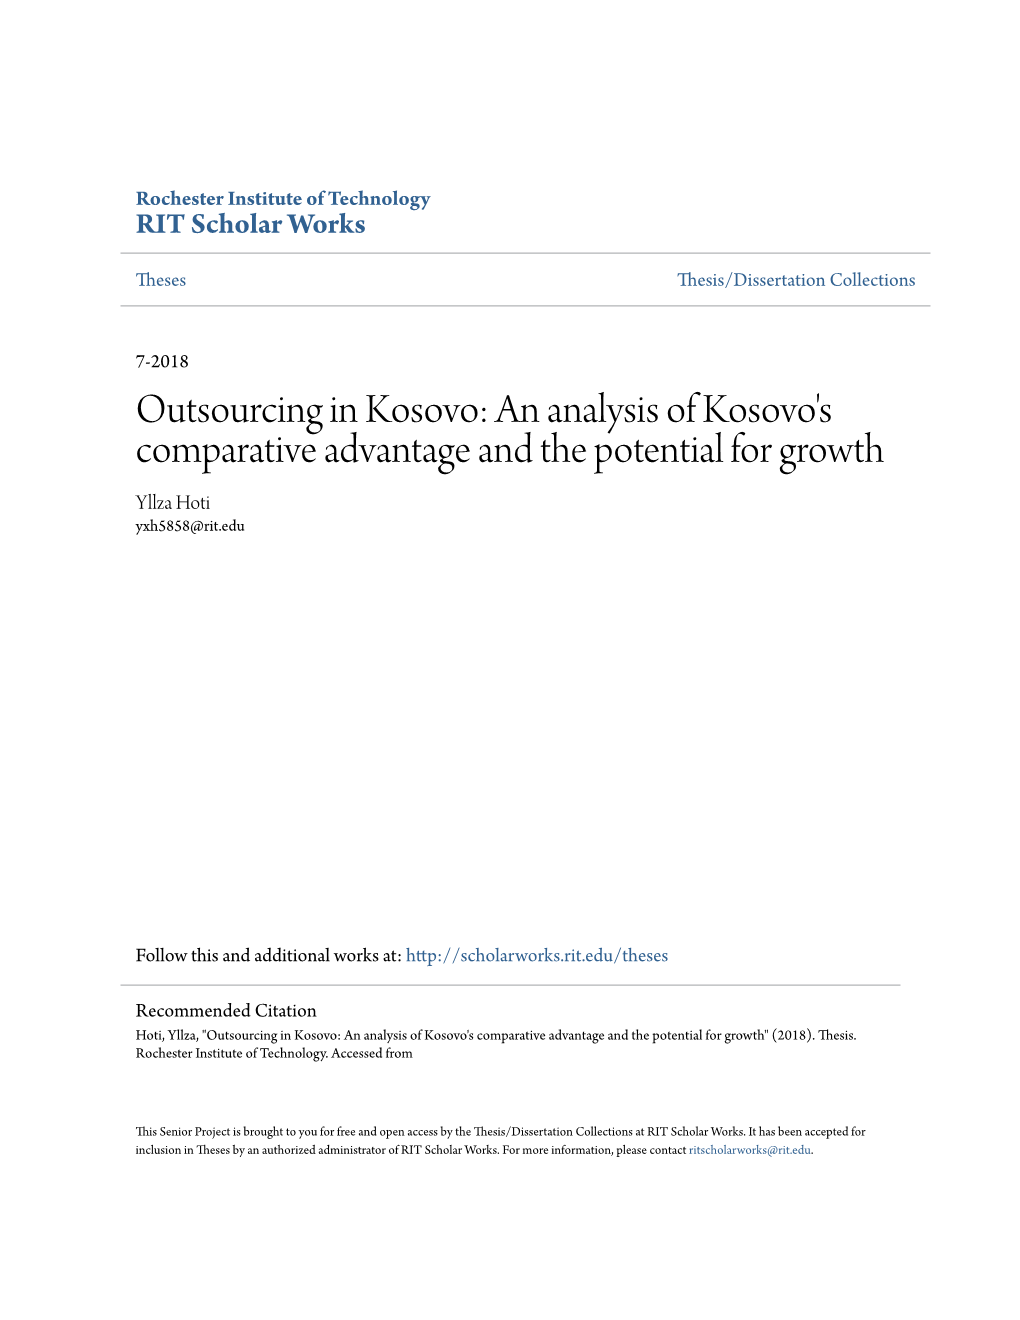 Outsourcing in Kosovo: an Analysis of Kosovo's Comparative Advantage and the Potential for Growth Yllza Hoti Yxh5858@Rit.Edu